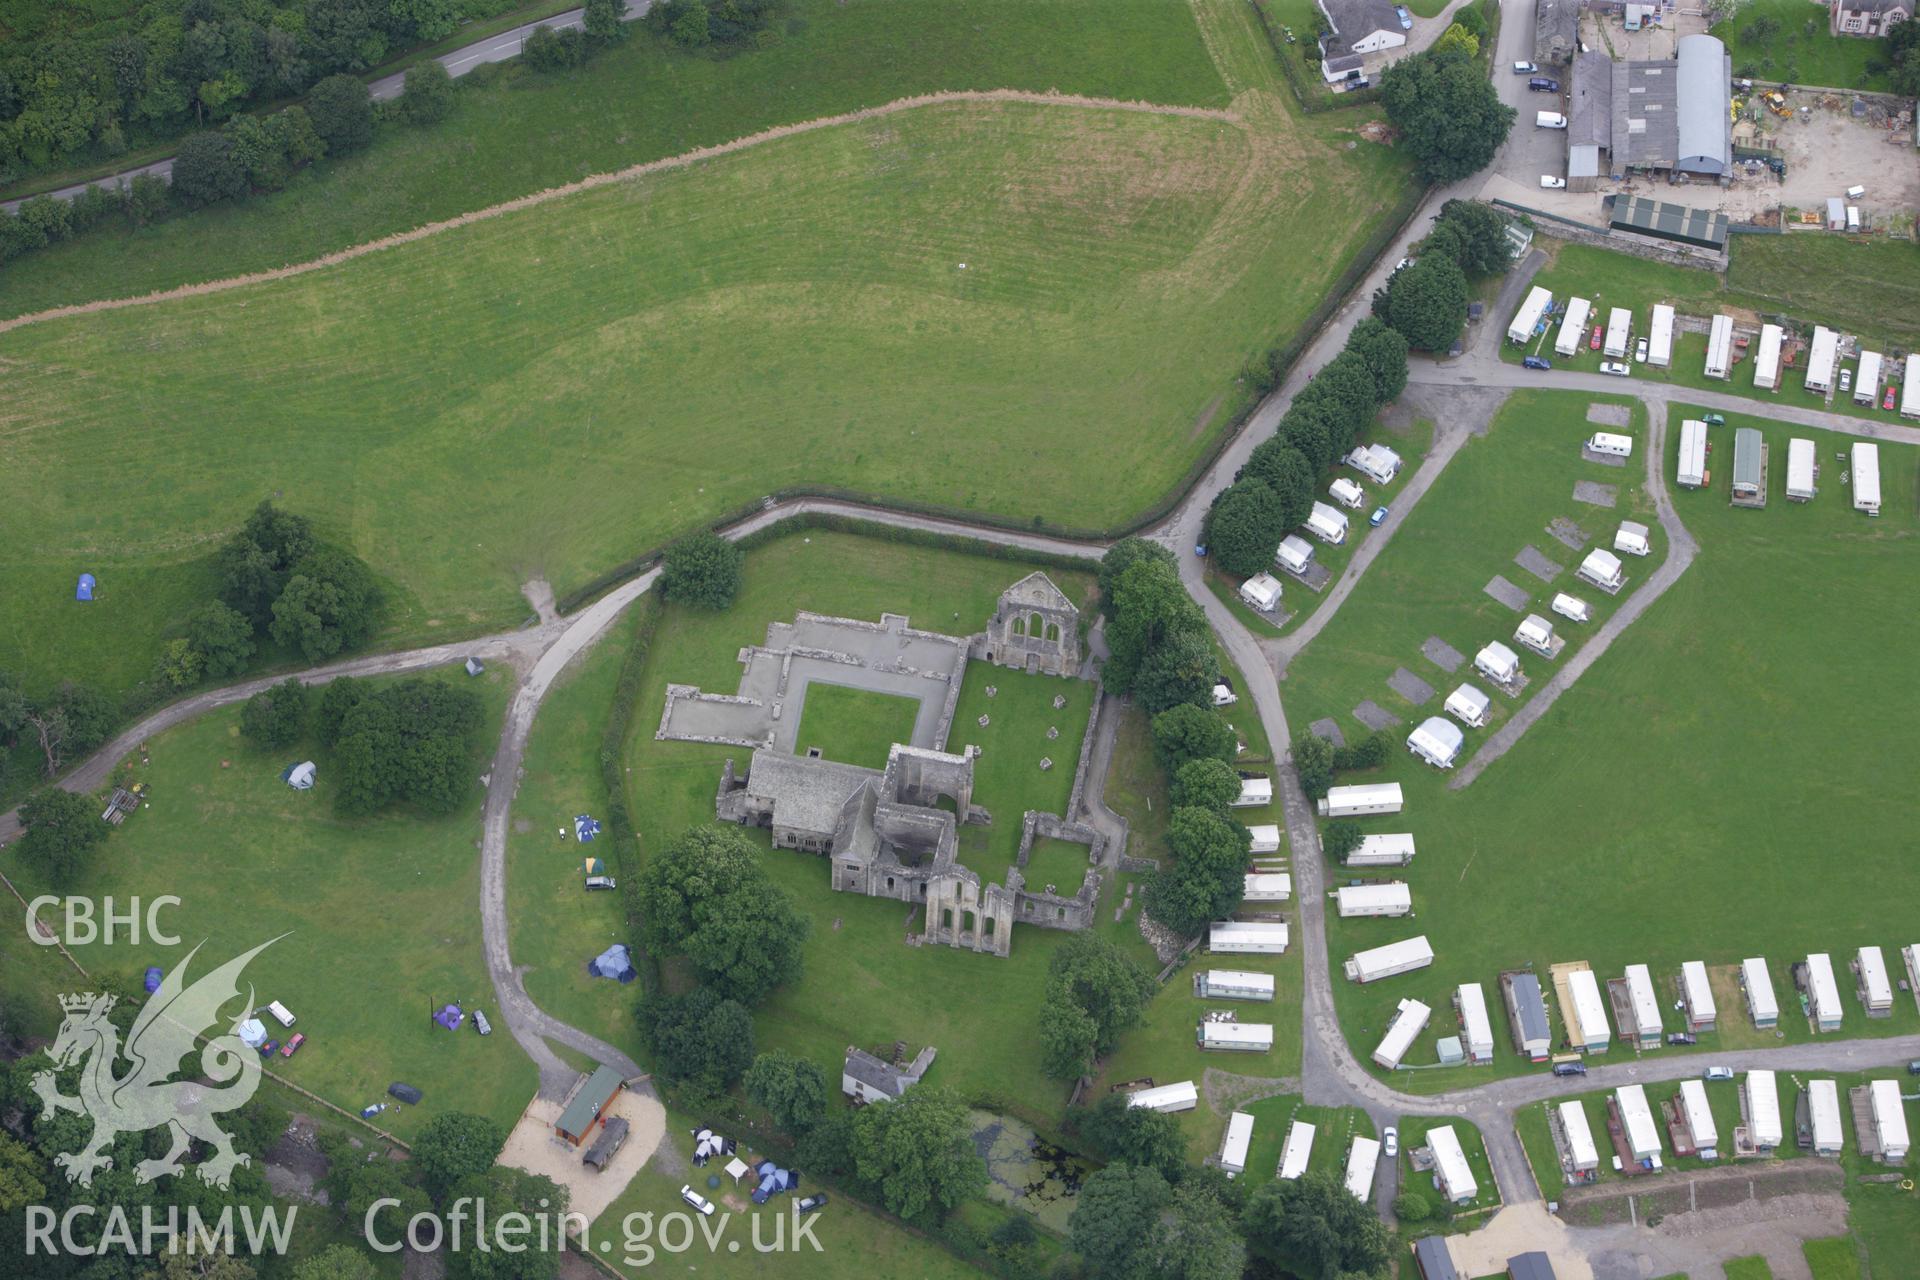 RCAHMW colour oblique aerial photograph of Valle Crucis Abbey. Taken on 08 July 2009 by Toby Driver